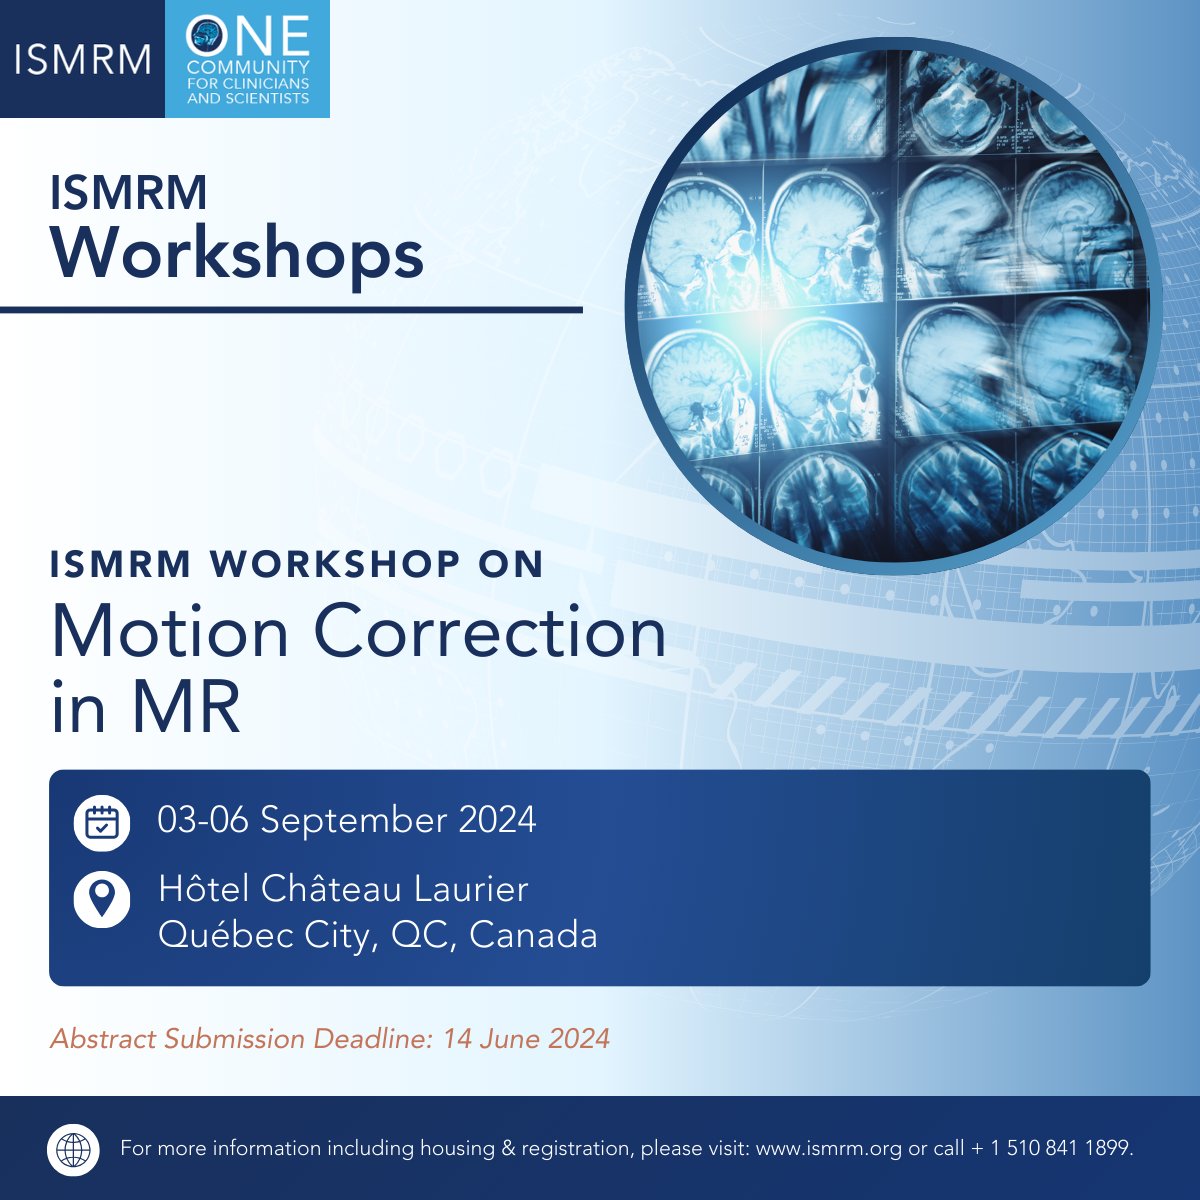 WORKSHOP WEDNESDAY: Get your abstracts ready for the next ISMRM workshop: ISMRM Workshop on Motion Correction in MR 03-06 September 2024 The abstract submission & stipend application site is now open! Learn more: ow.ly/2z3o50S16Ul #ISMRM #ISMRT #MRI #MagneticResonance